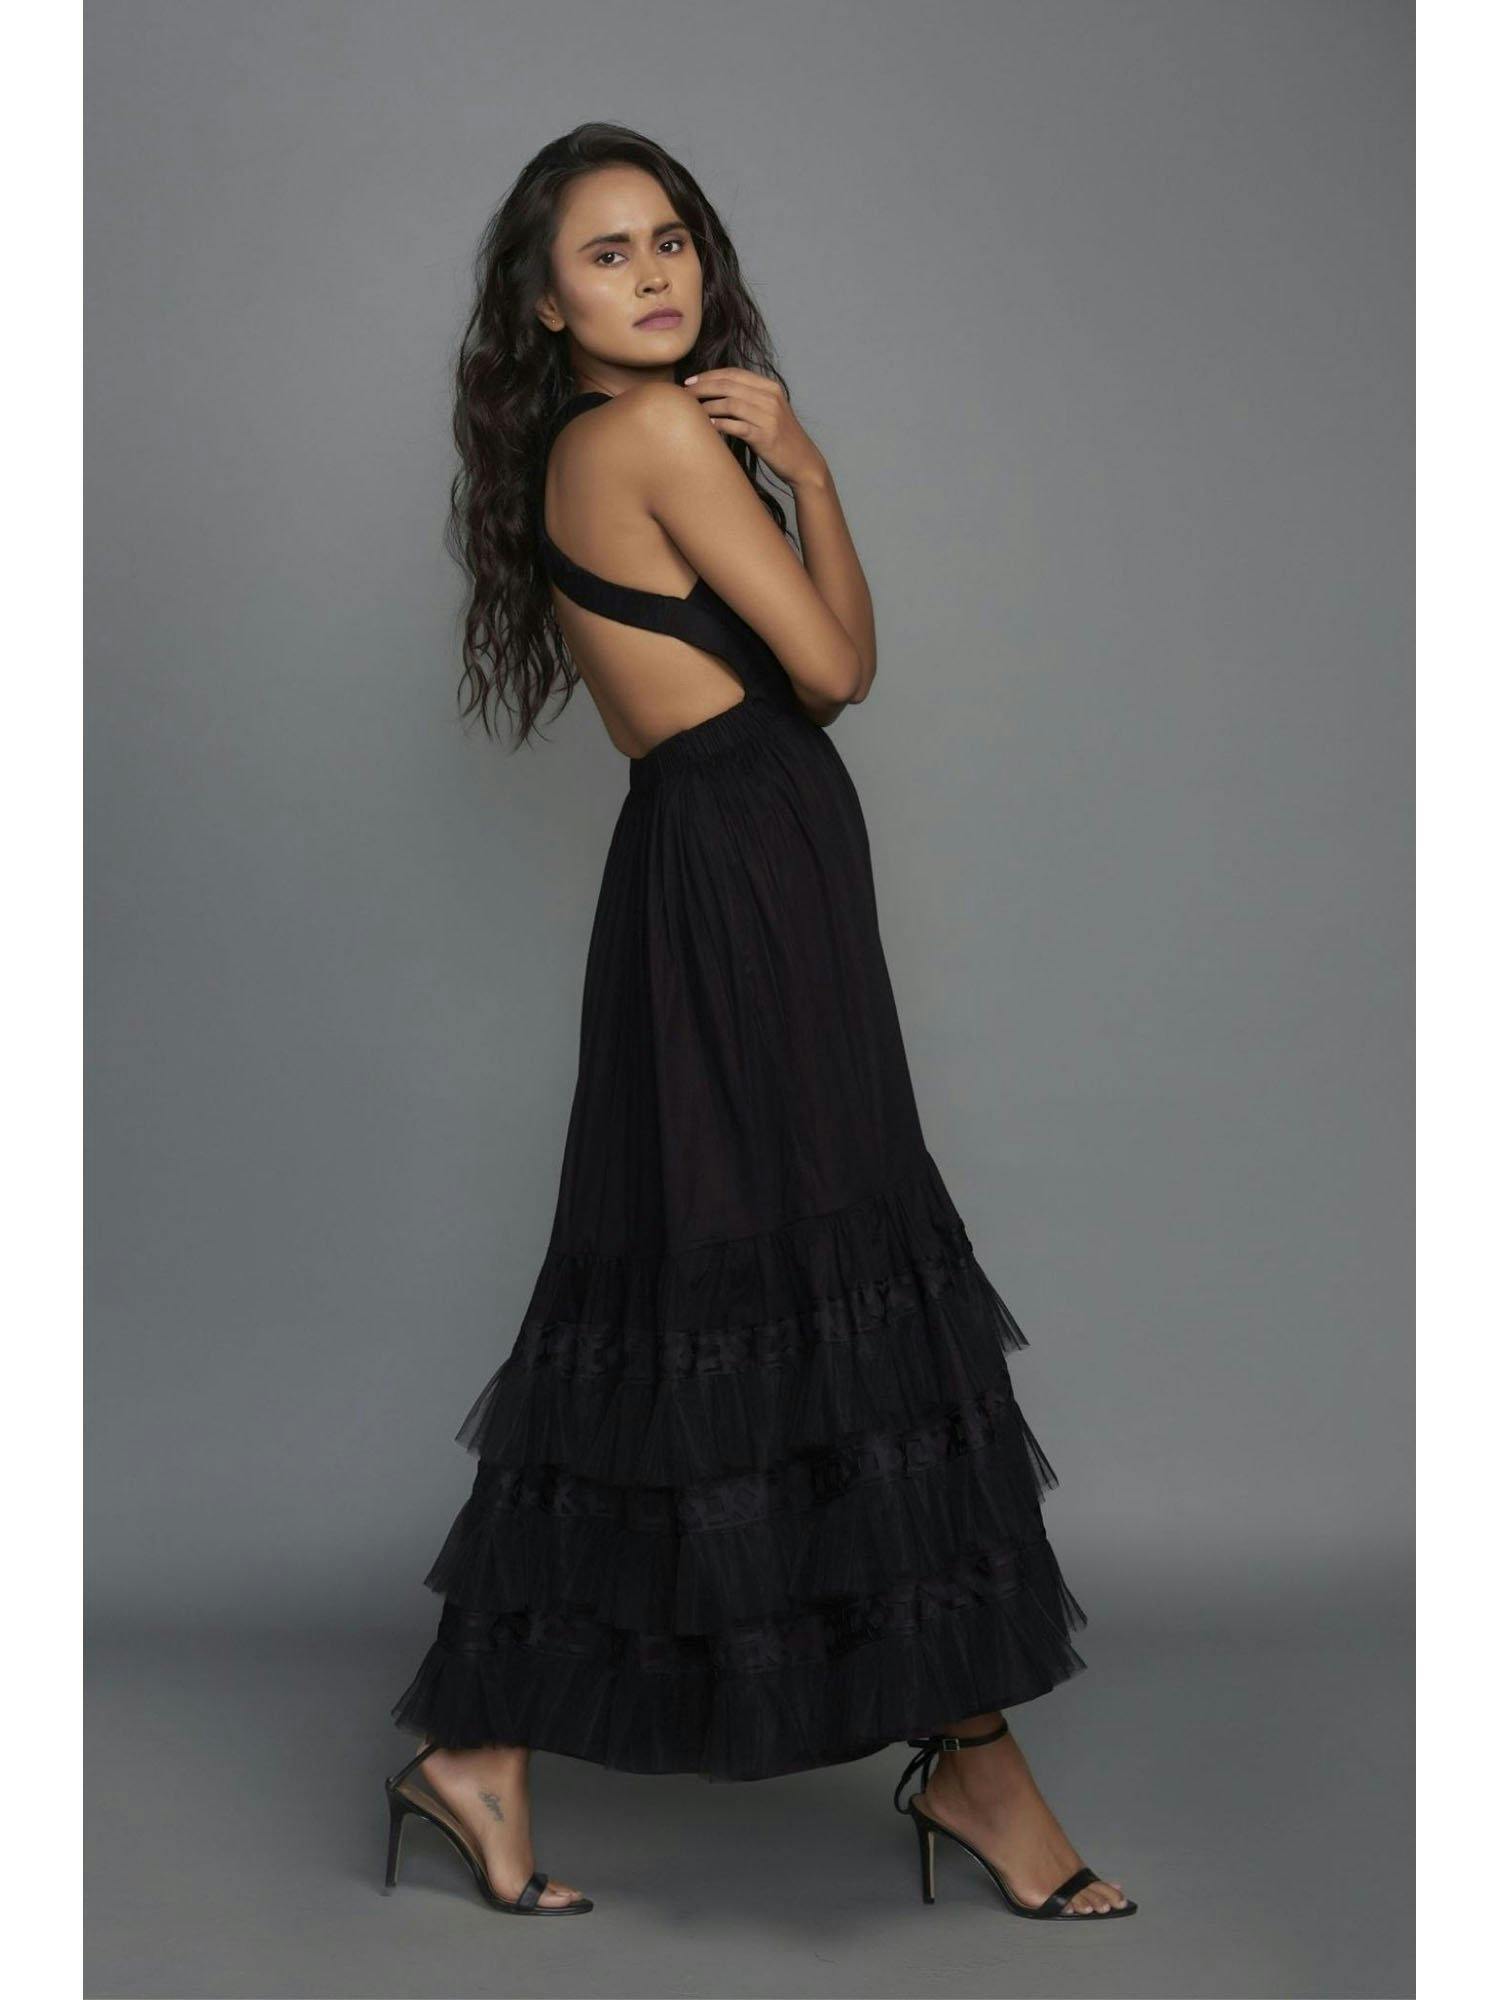 black dress with cross back and cutwork details on the bottom, a product by Deepika Arora